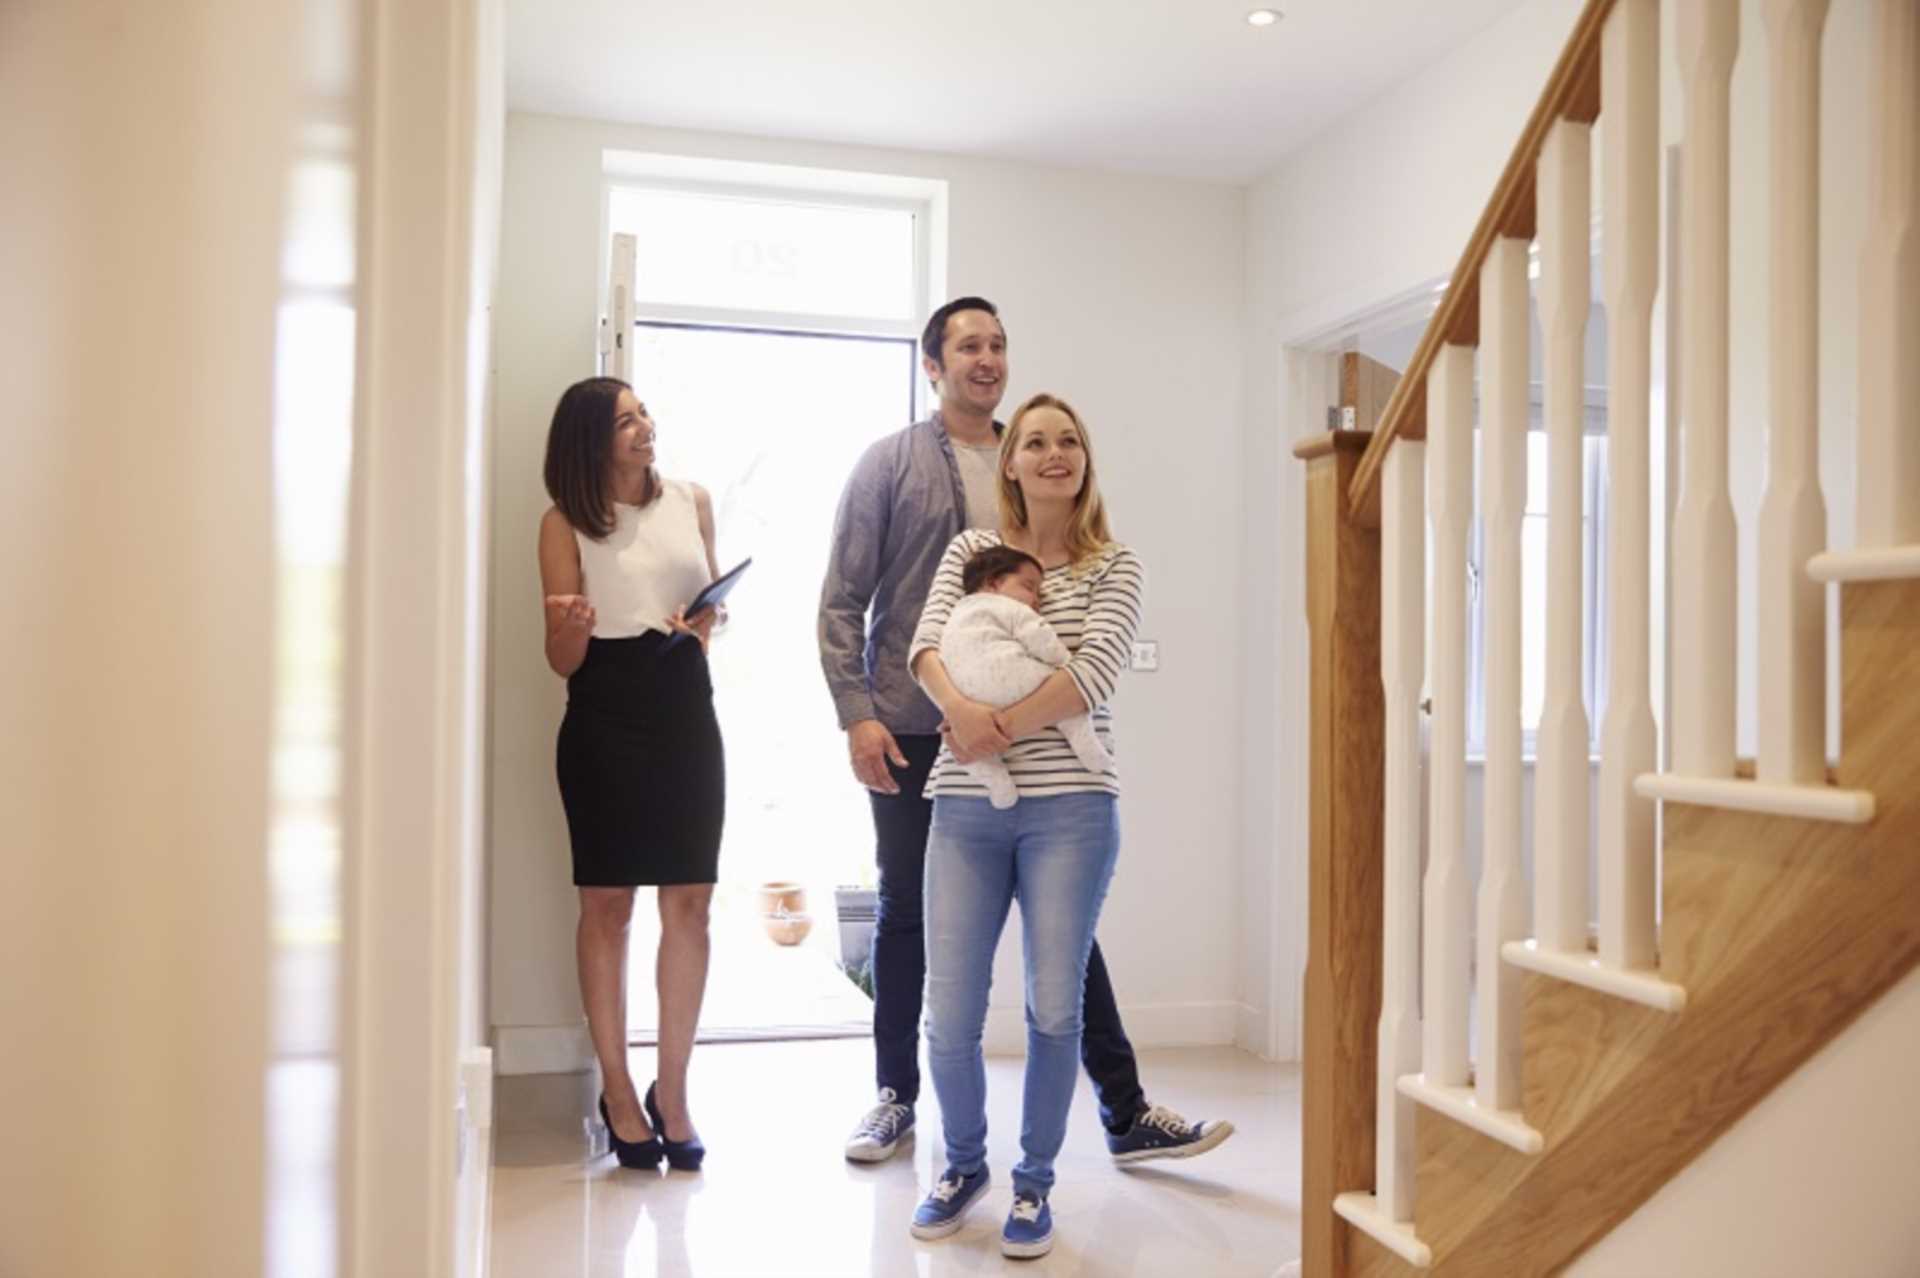 Take these 10 key factors into account during your next property viewing...